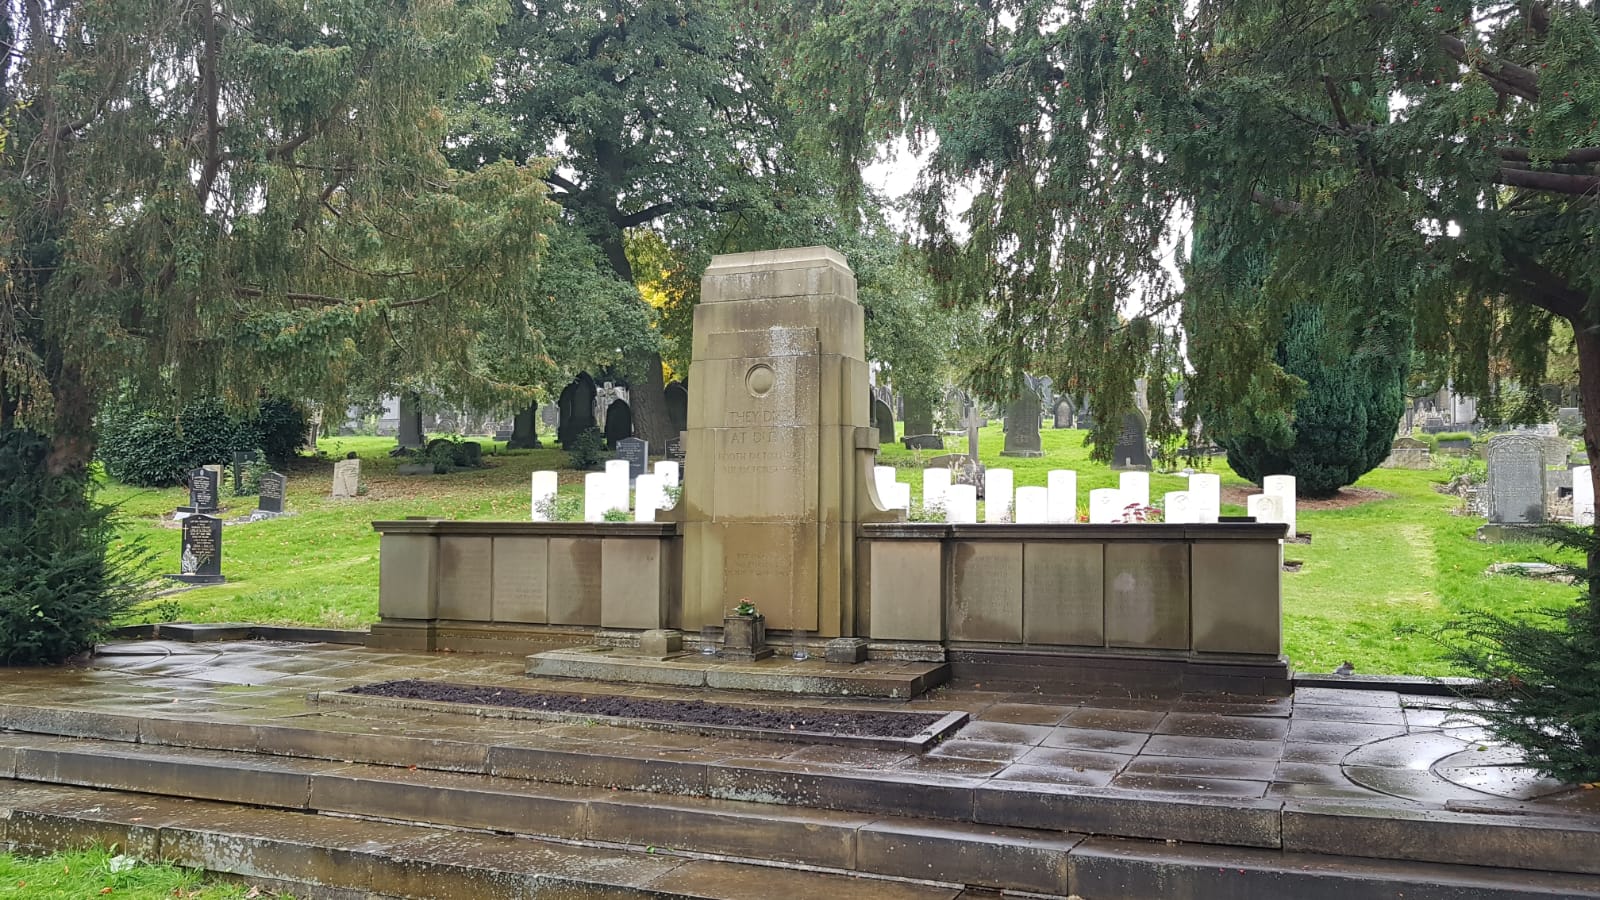 Photograph of Booth's memorial.